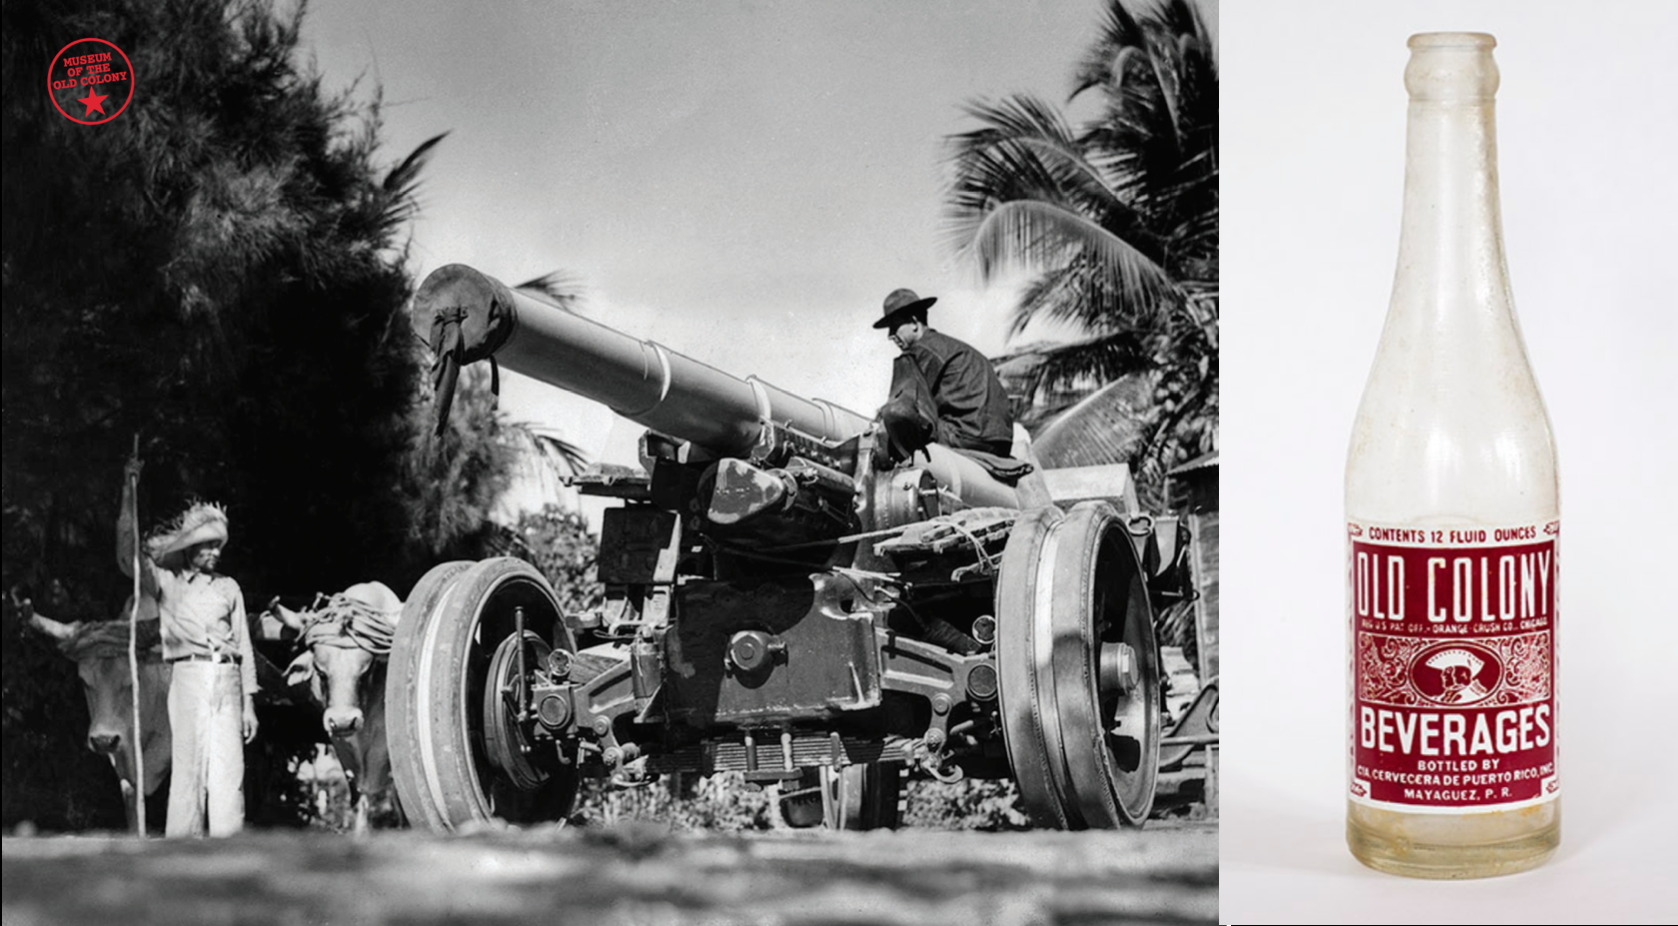 archival photograph of soldier with tank, photograph of Old Colony brand soda bottle